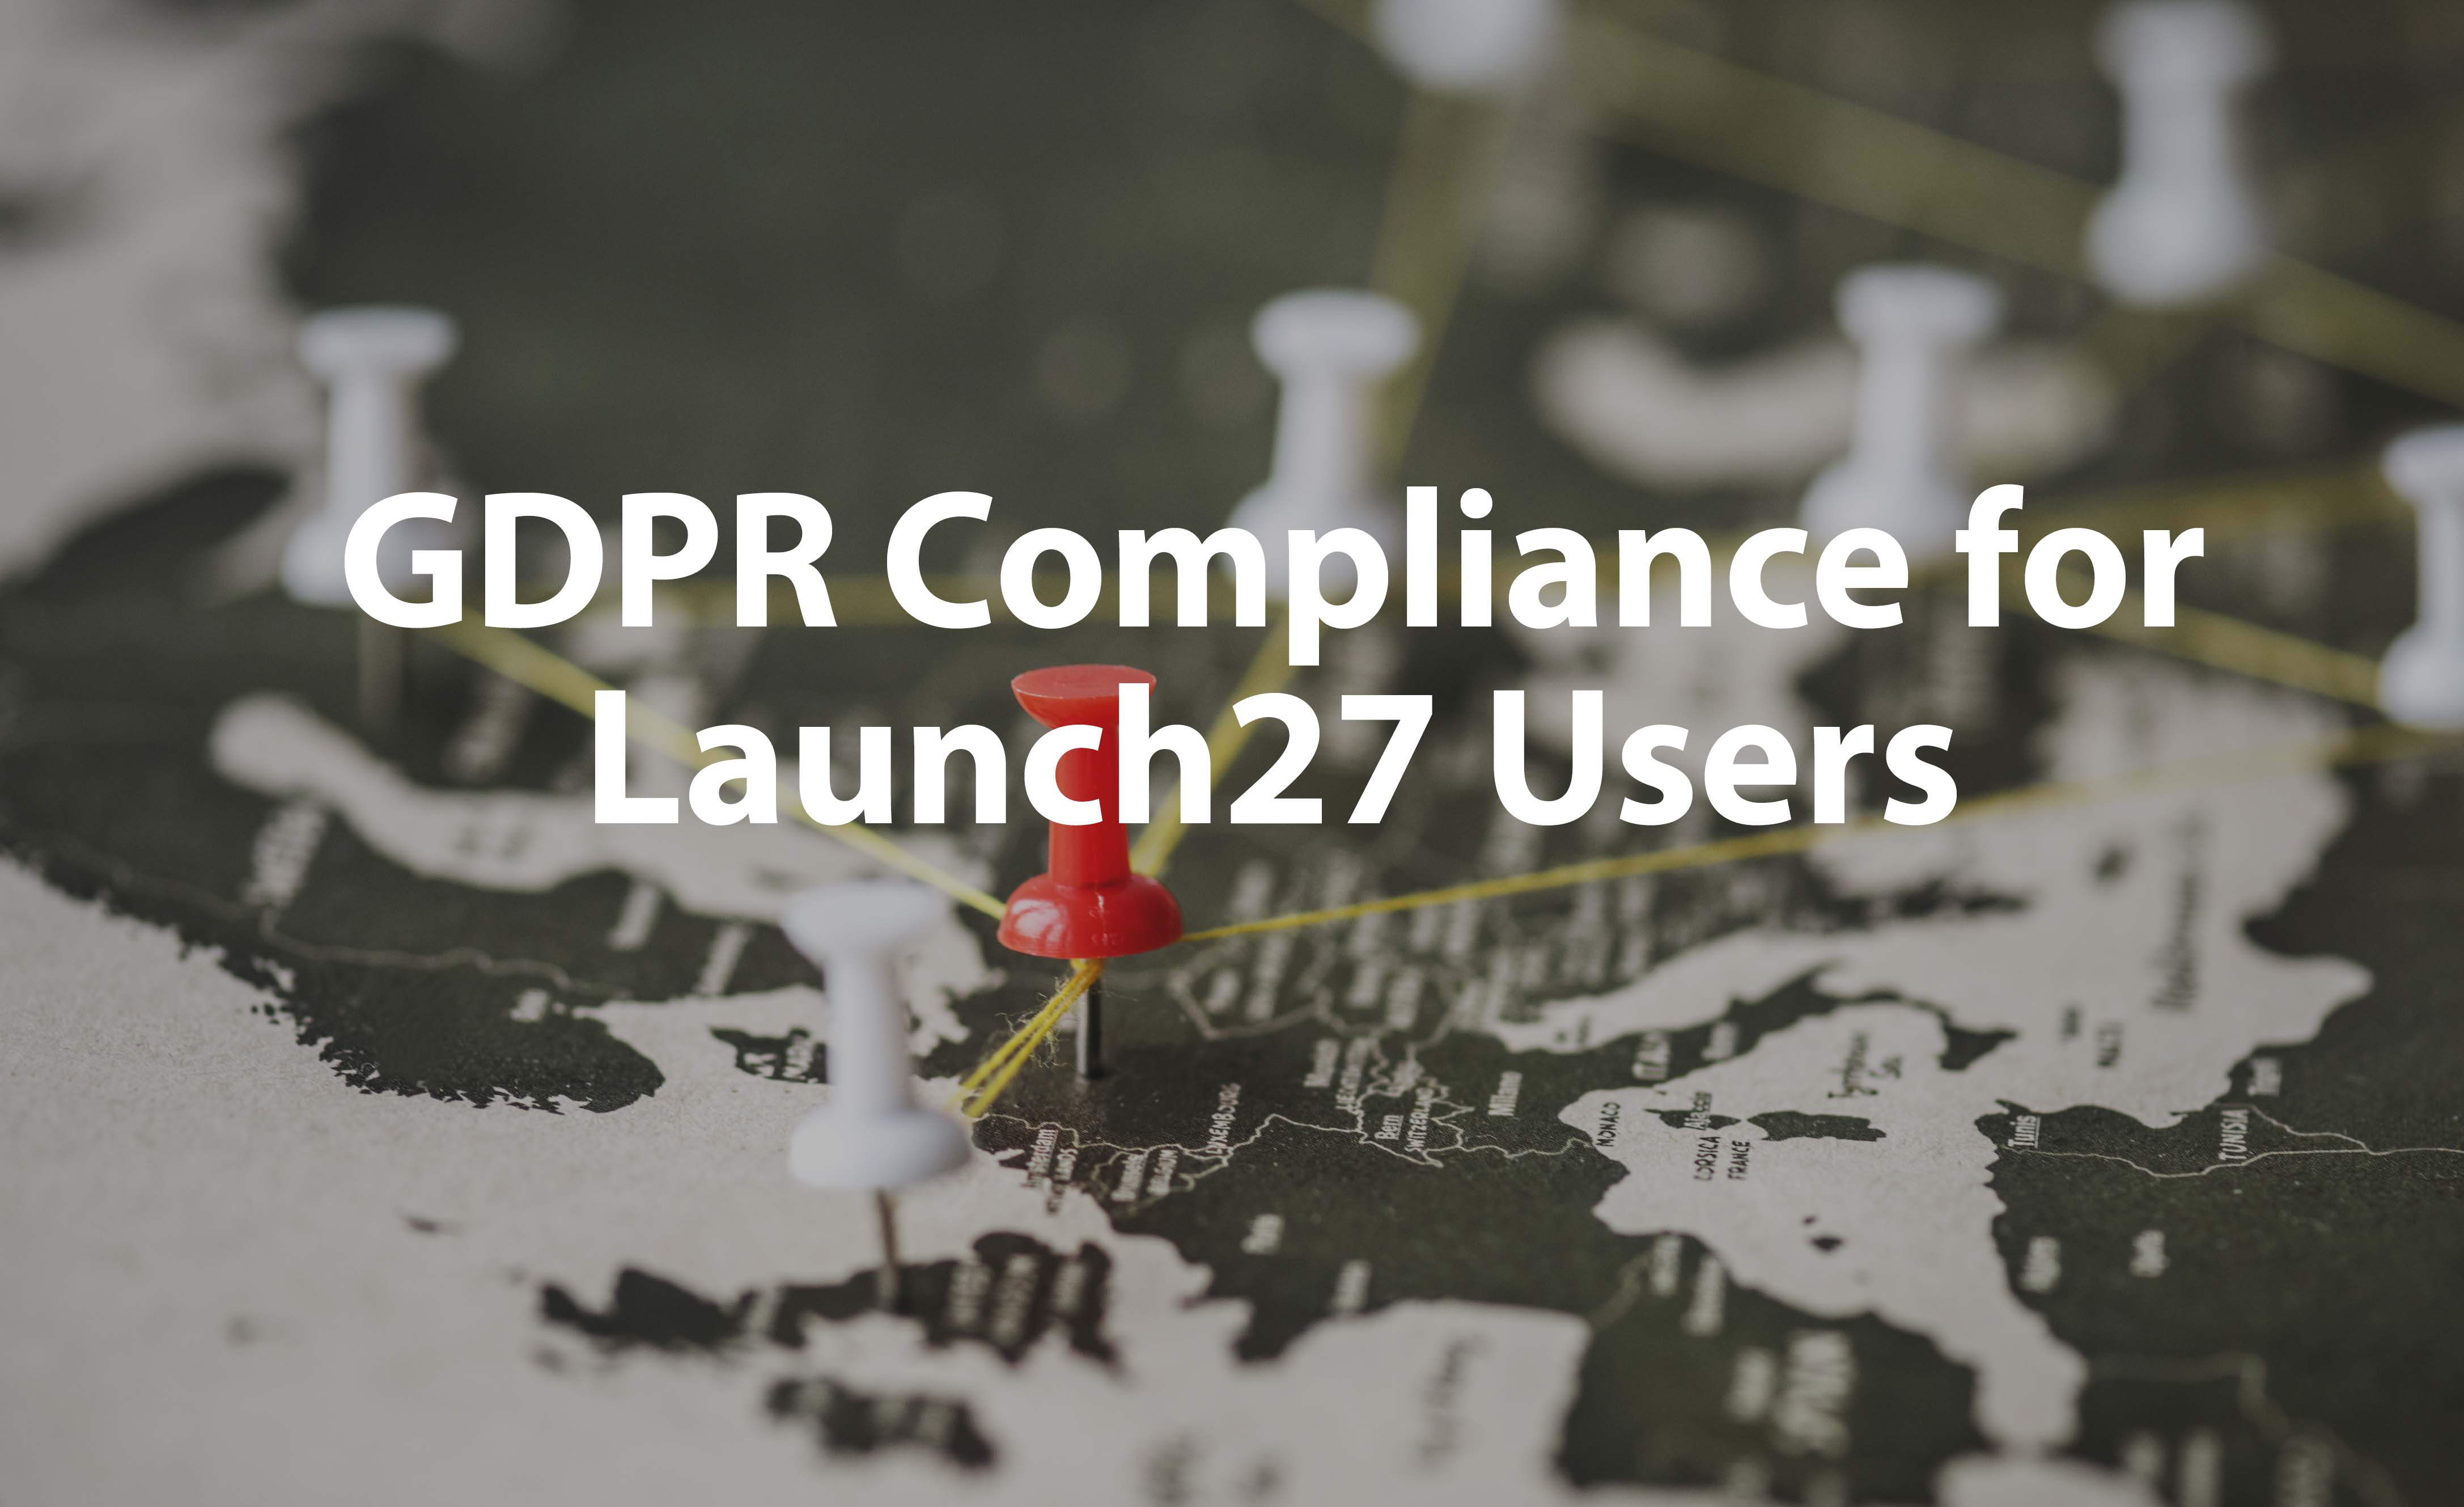 GDPR Compliance for Launch27 Users